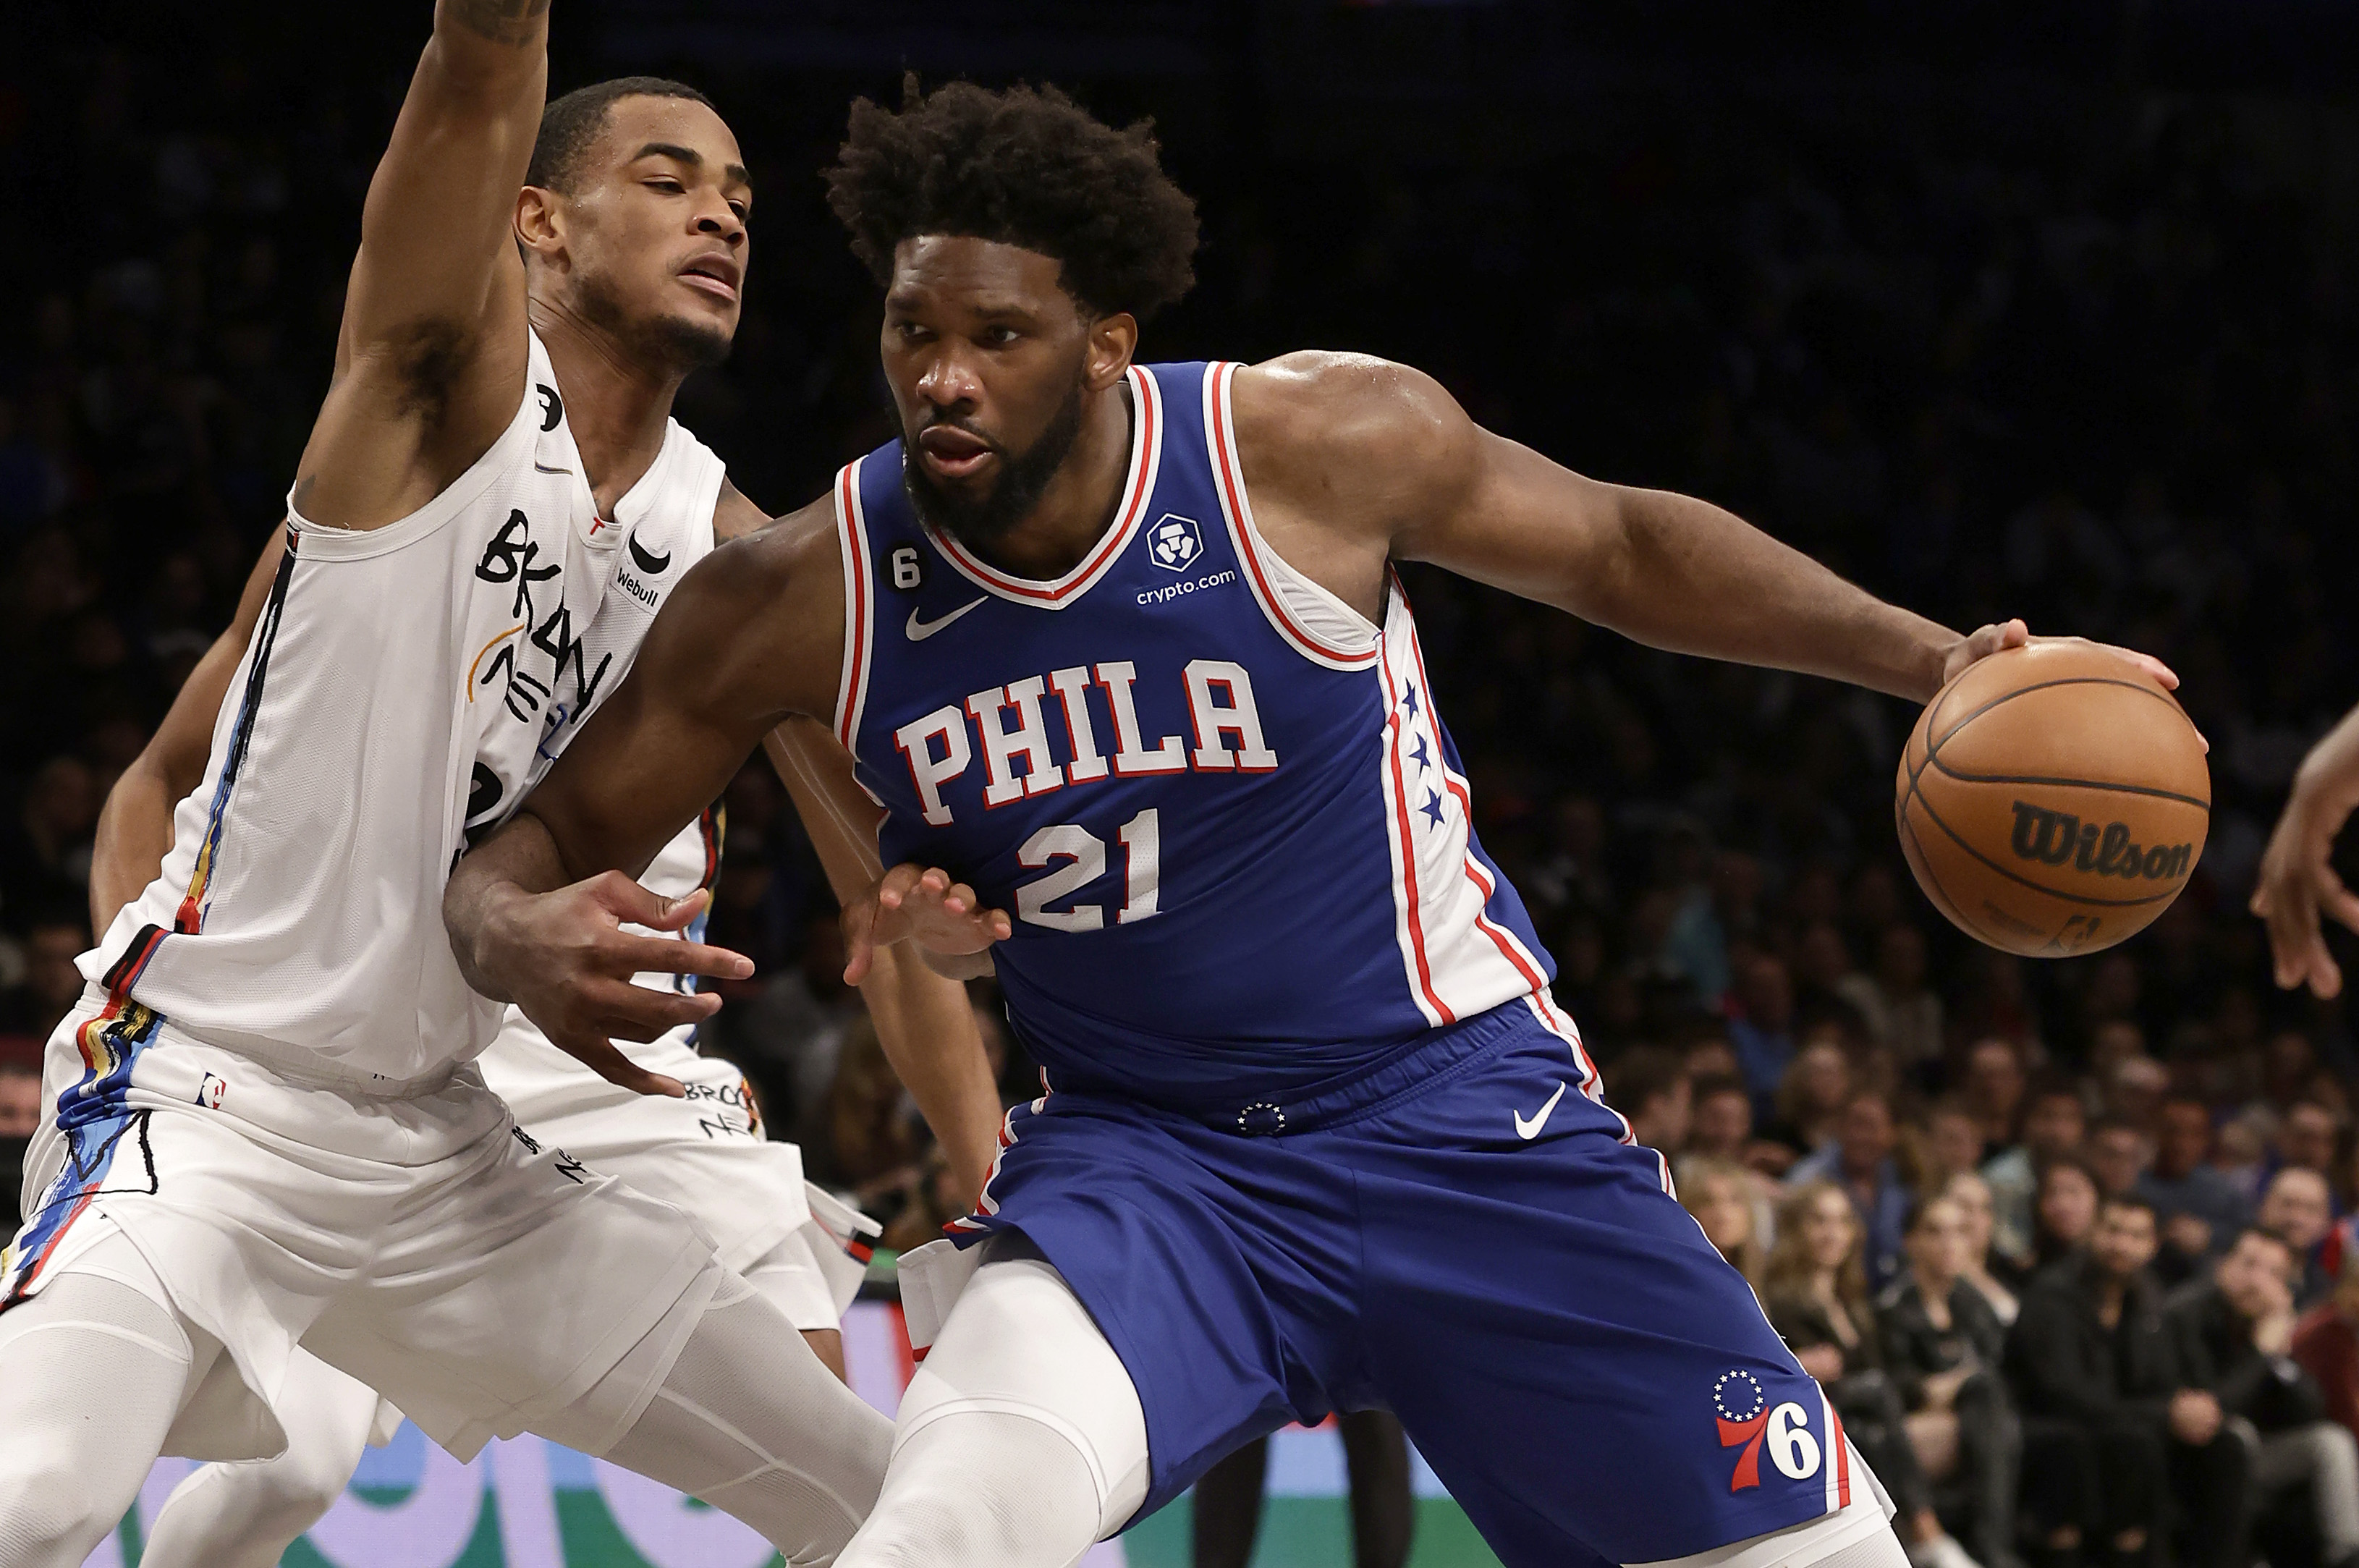 Joel Embiid (#21) of the Philadelphia 76ers drives toward the rim in the game against the Brooklyn Nets at the Barclays Center in Brooklyn, New York City, February 11, 2023. /CFP